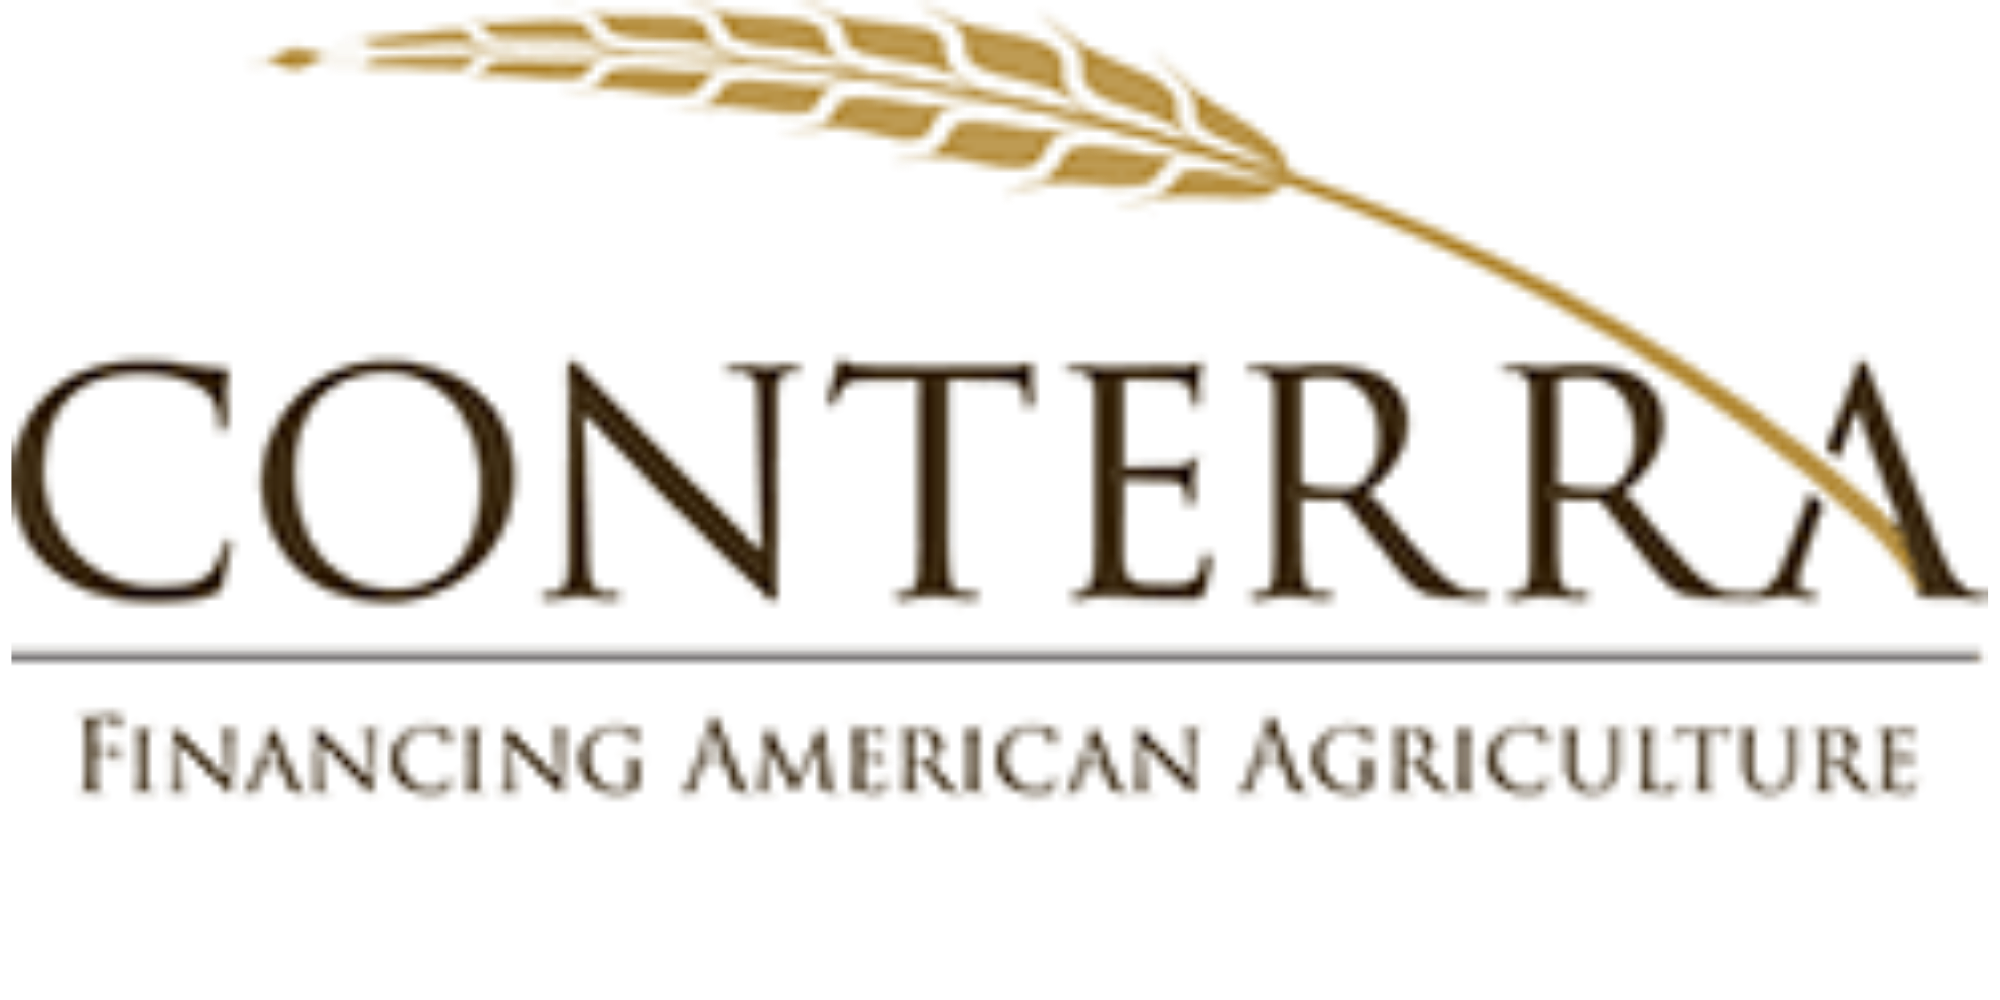 Conterra Financing American Agriculture